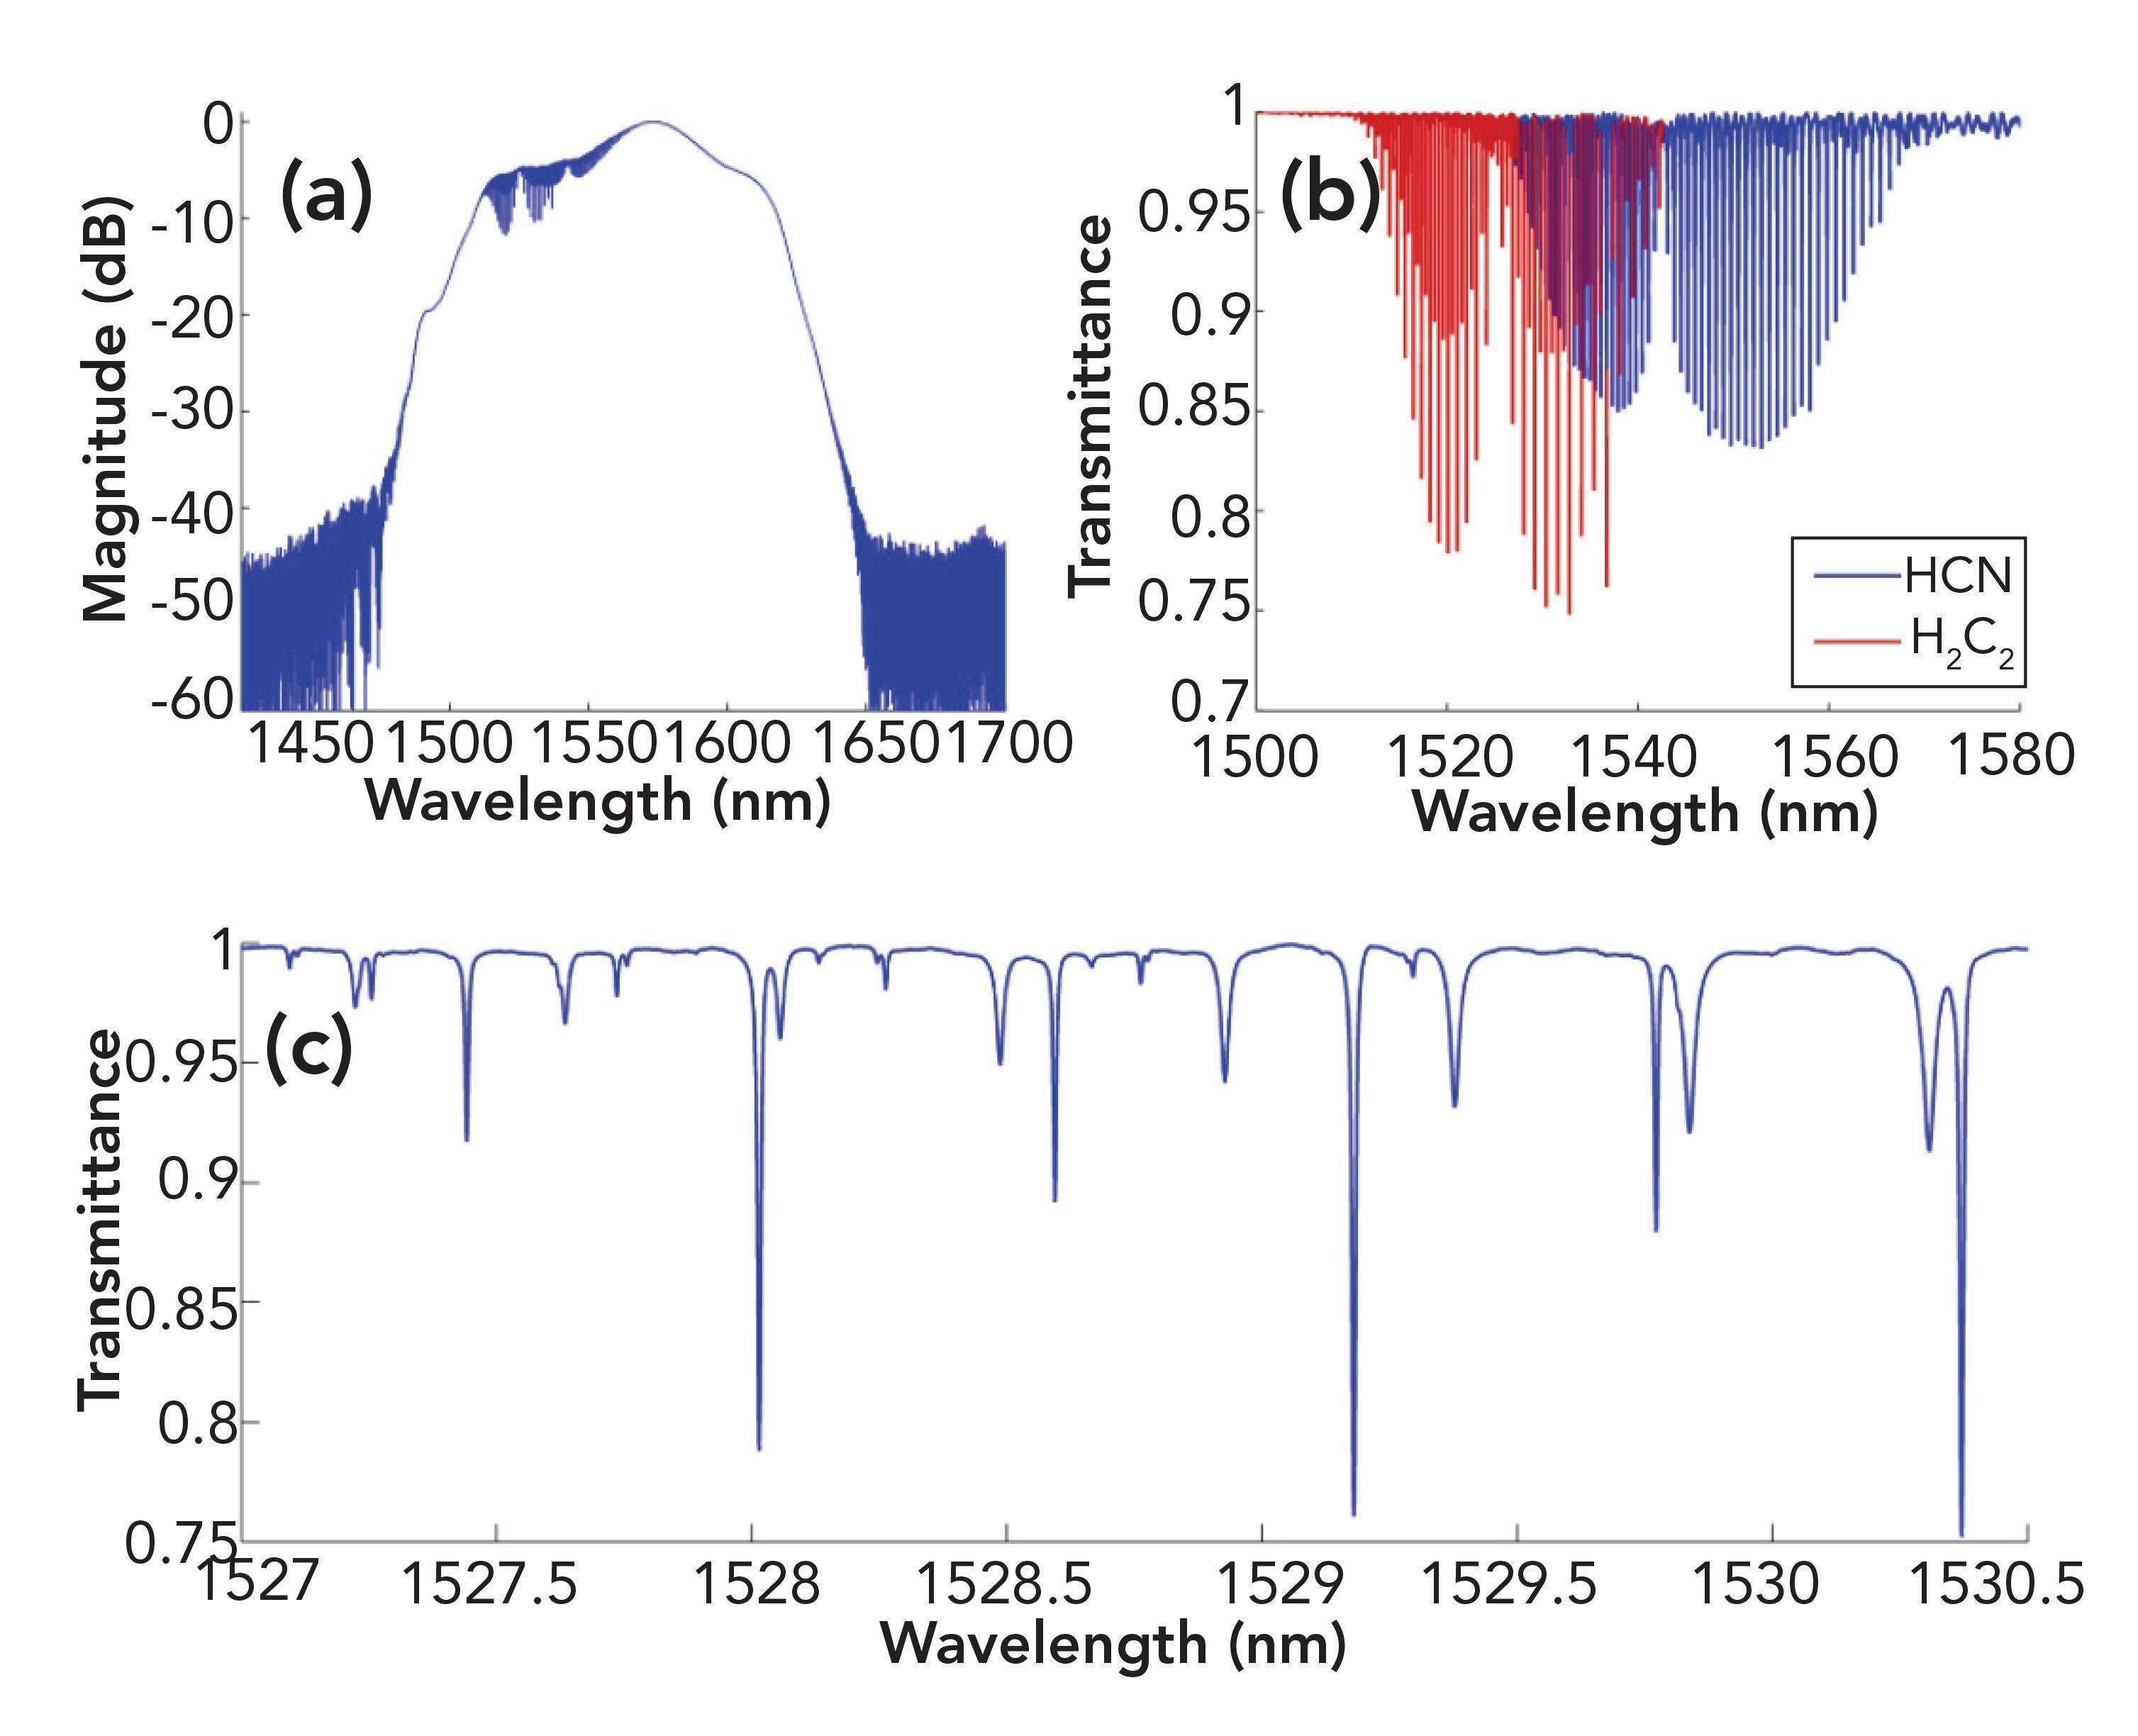 FIGURE 4: Spectrum from a 24-hour measurement with real-time digital correction of interferograms. (a) Full spectrum on a logarithmic scale. (b) Transmittance from gas cells containing C2H2 and HCN. The baseline was normalized by fitting. (c) Zoom between 1527 nm and 1530.5 nm of the cell’s transmittance. Difference in the width between HCN and C2H2 lines is attributable to the pressure in the two cells.